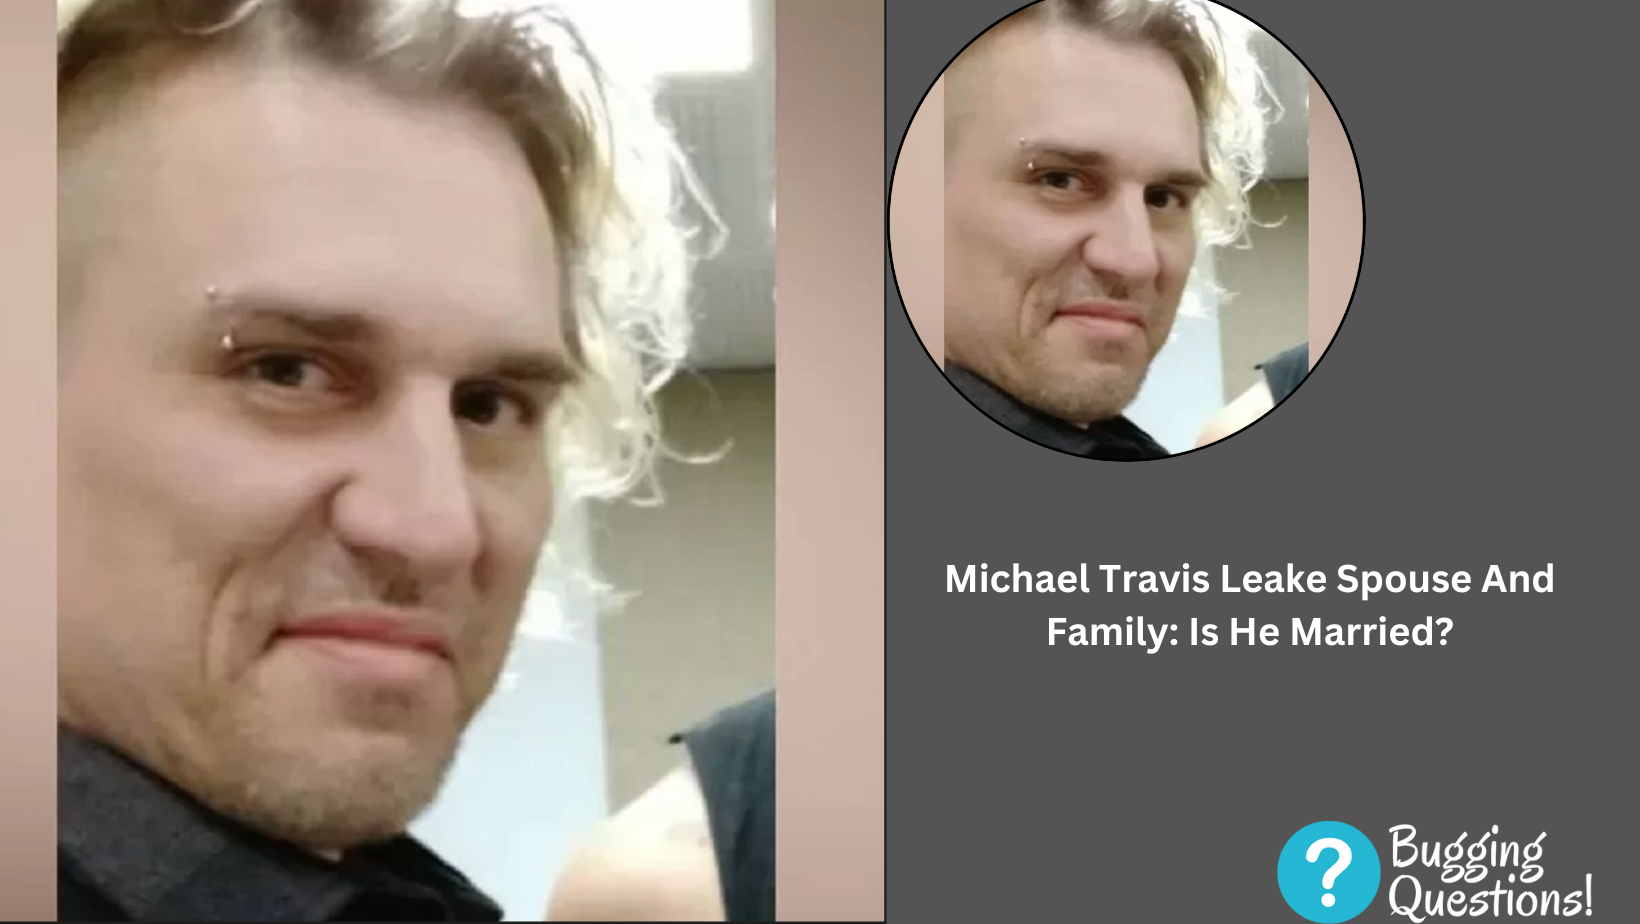 Michael Travis Leake Spouse And Family: Is He Married?